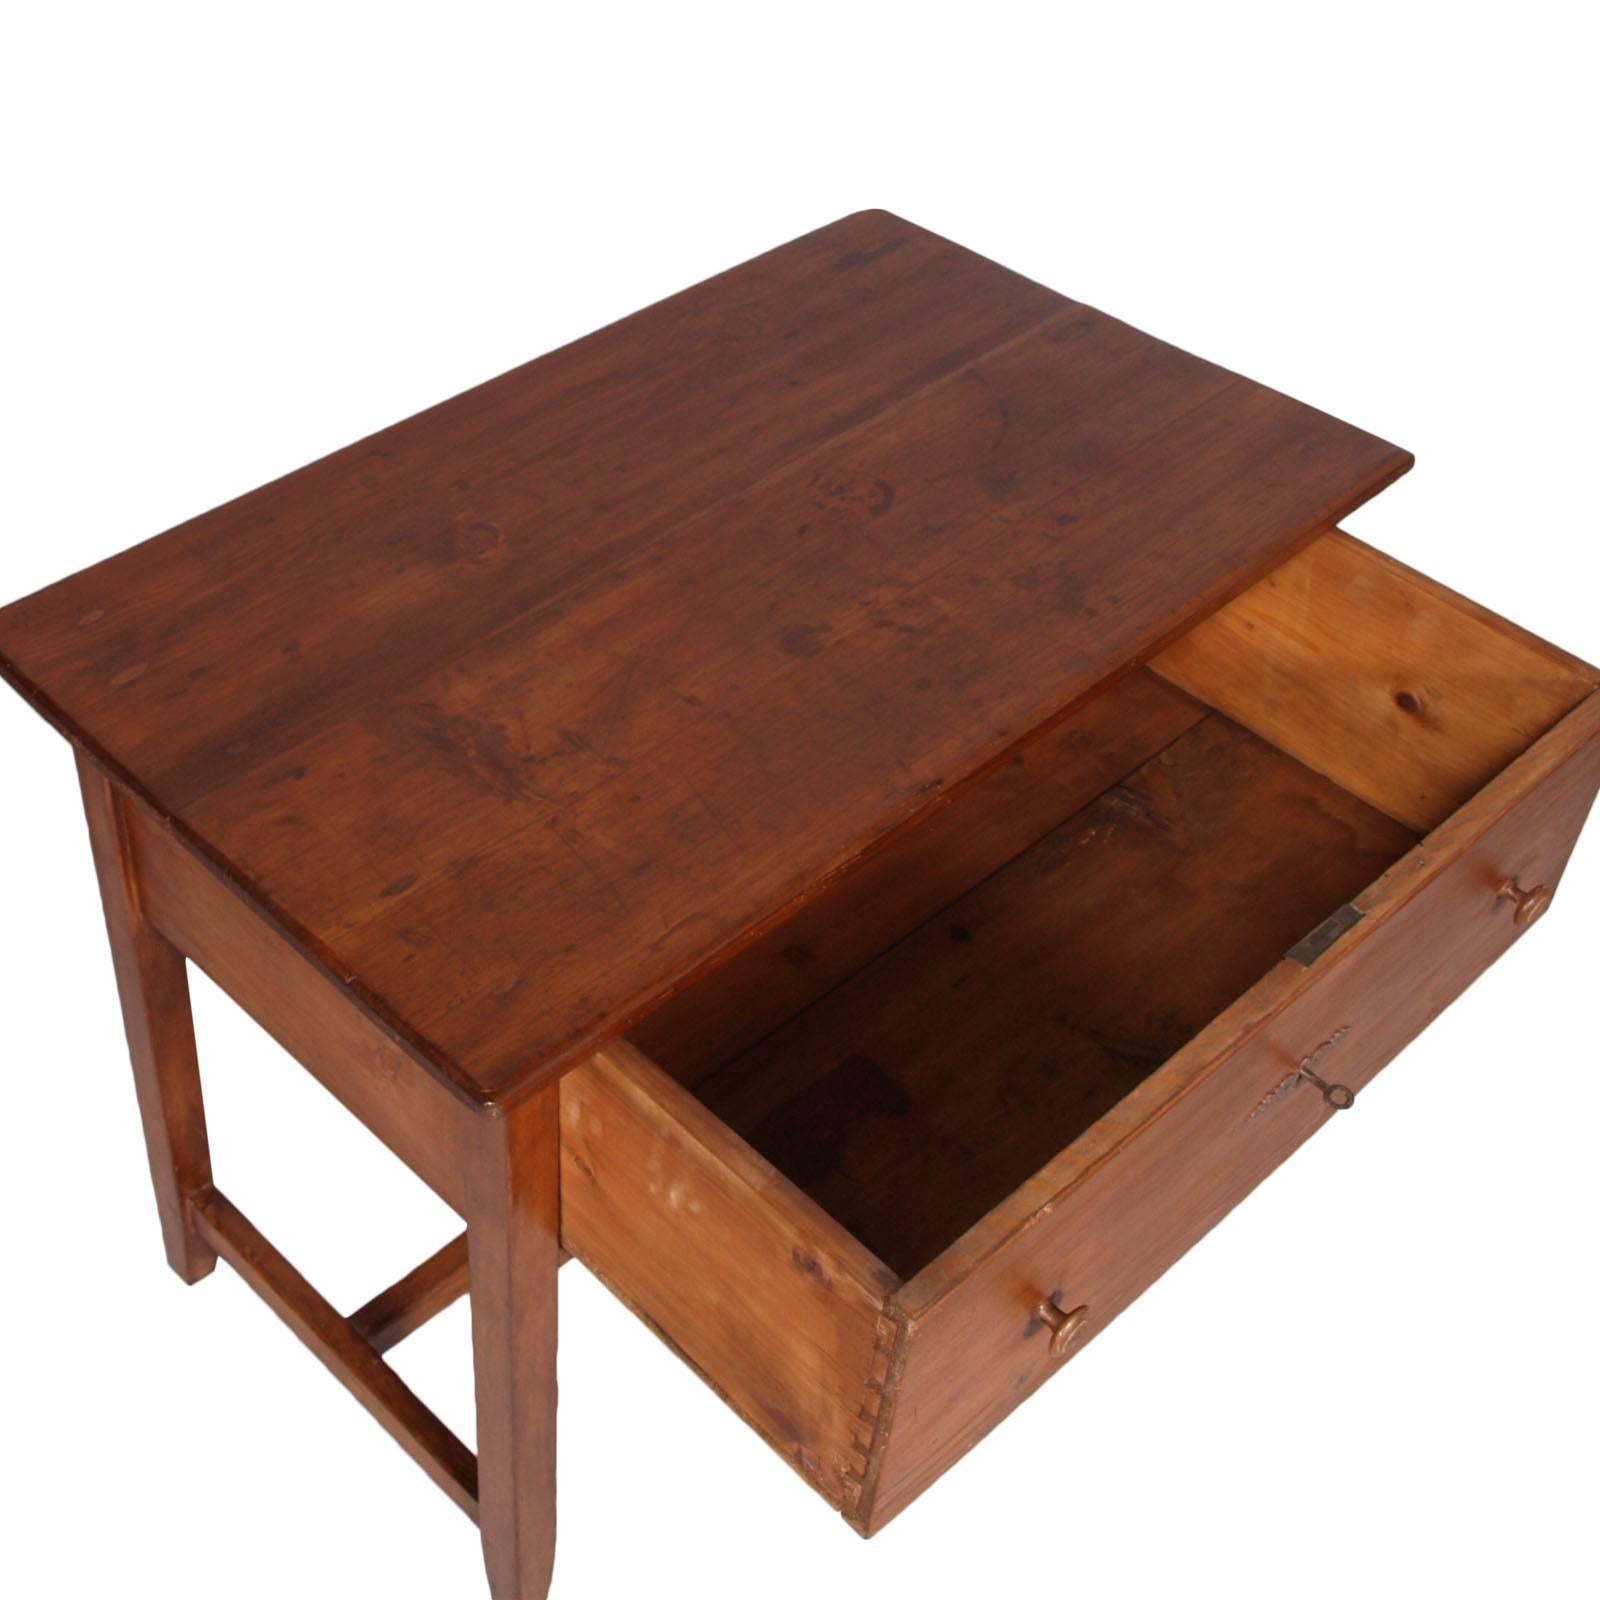 Antique country farm work desk in solid pine of the early 20th century
In excellent condition, Restored and polished to wax

Measure in cm: H 78, W 101, D 60.